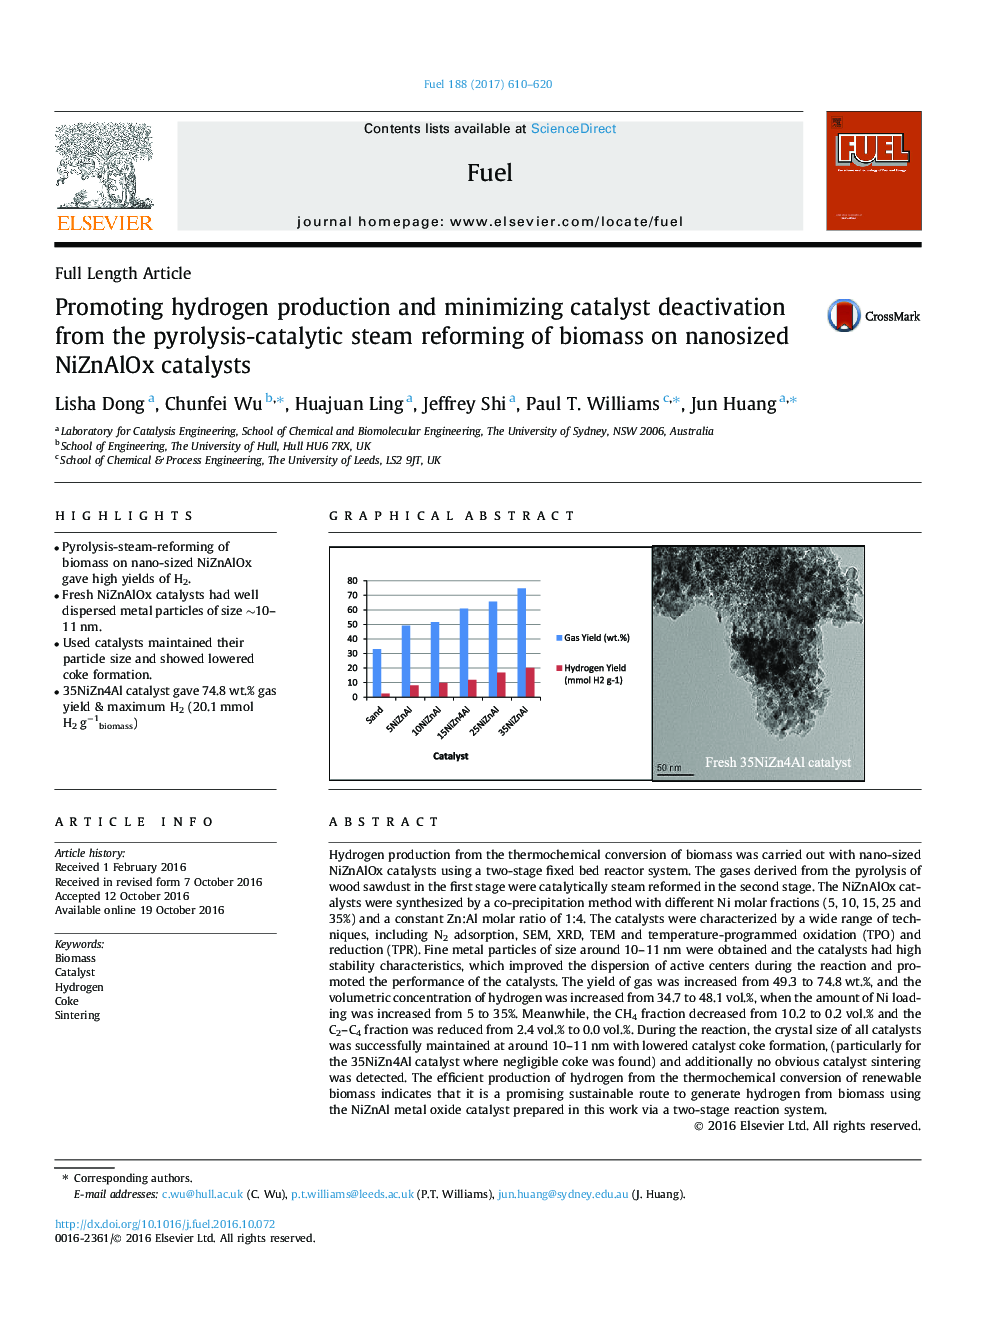 Promoting hydrogen production and minimizing catalyst deactivation from the pyrolysis-catalytic steam reforming of biomass on nanosized NiZnAlOx catalysts